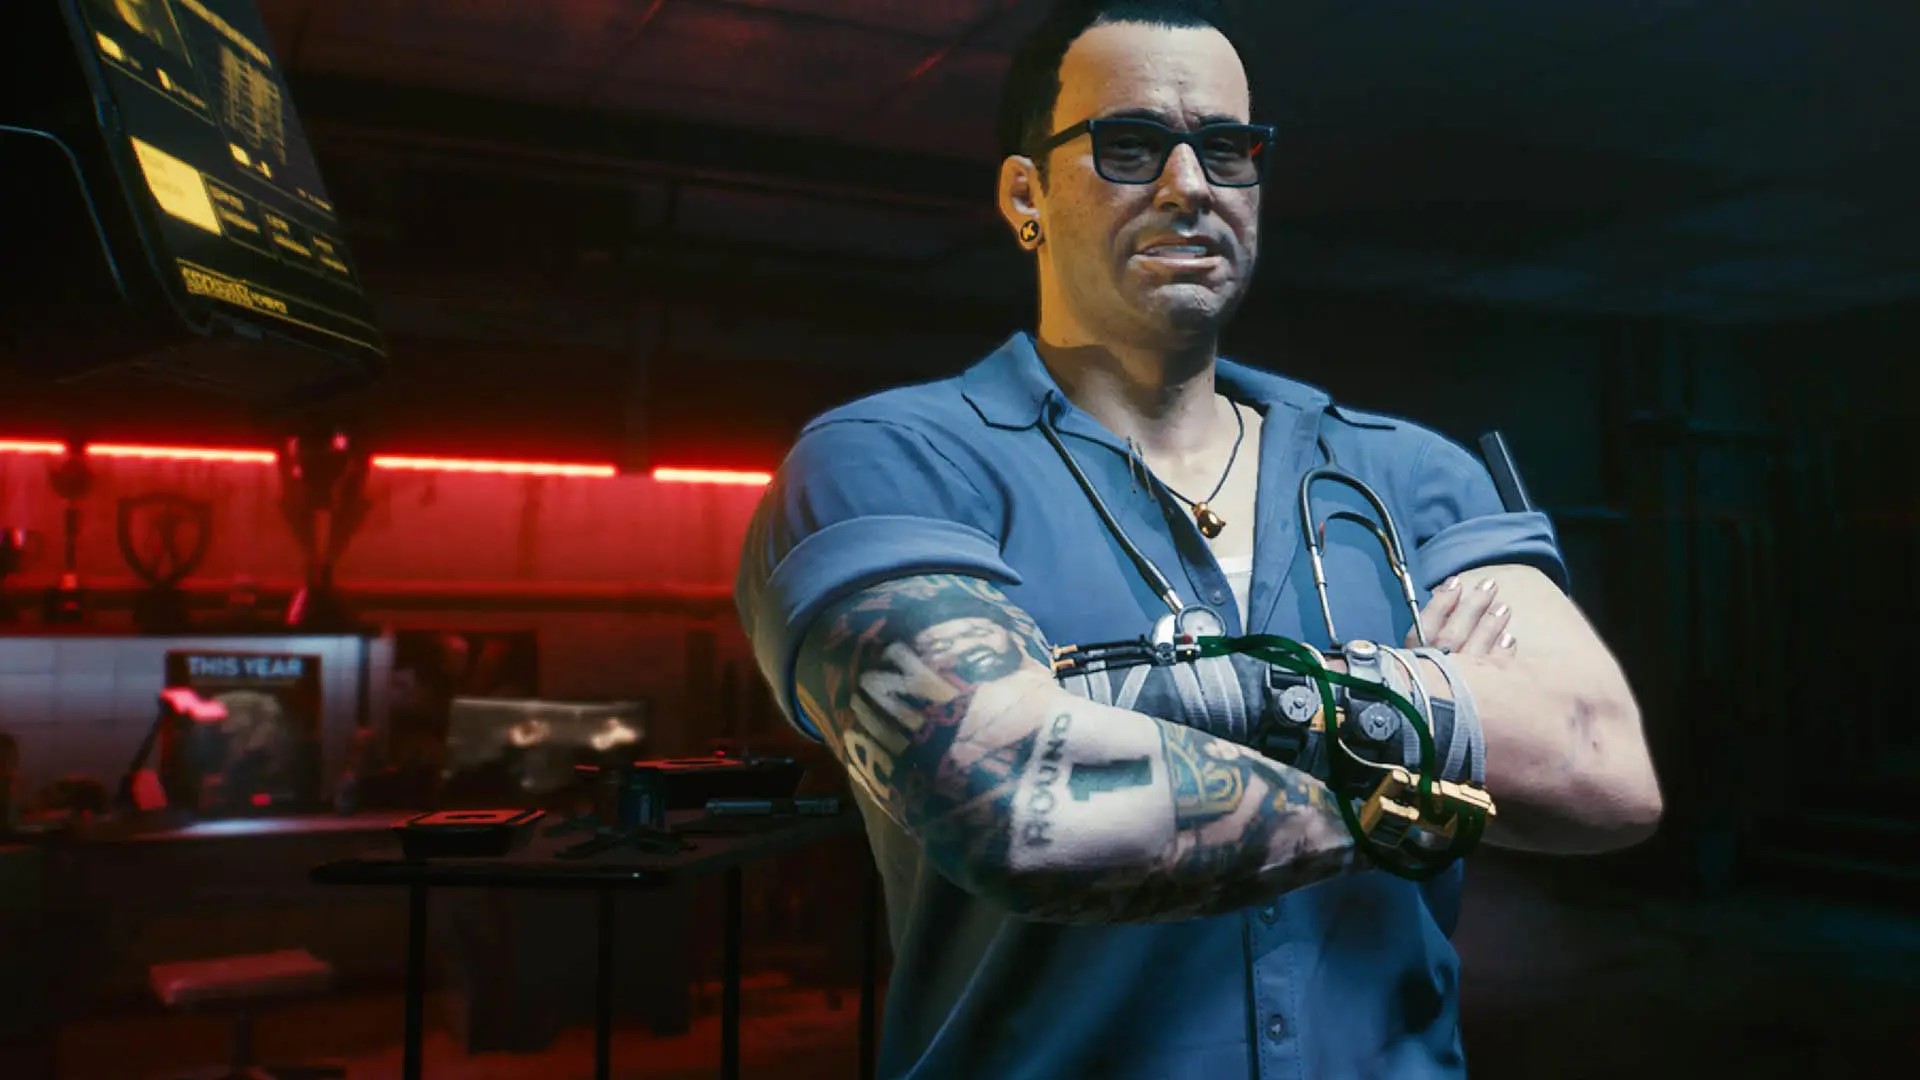 CD Projekt Red Used AI To Recreate The Voice Of A Dead Voice Actor In Phantom Liberty